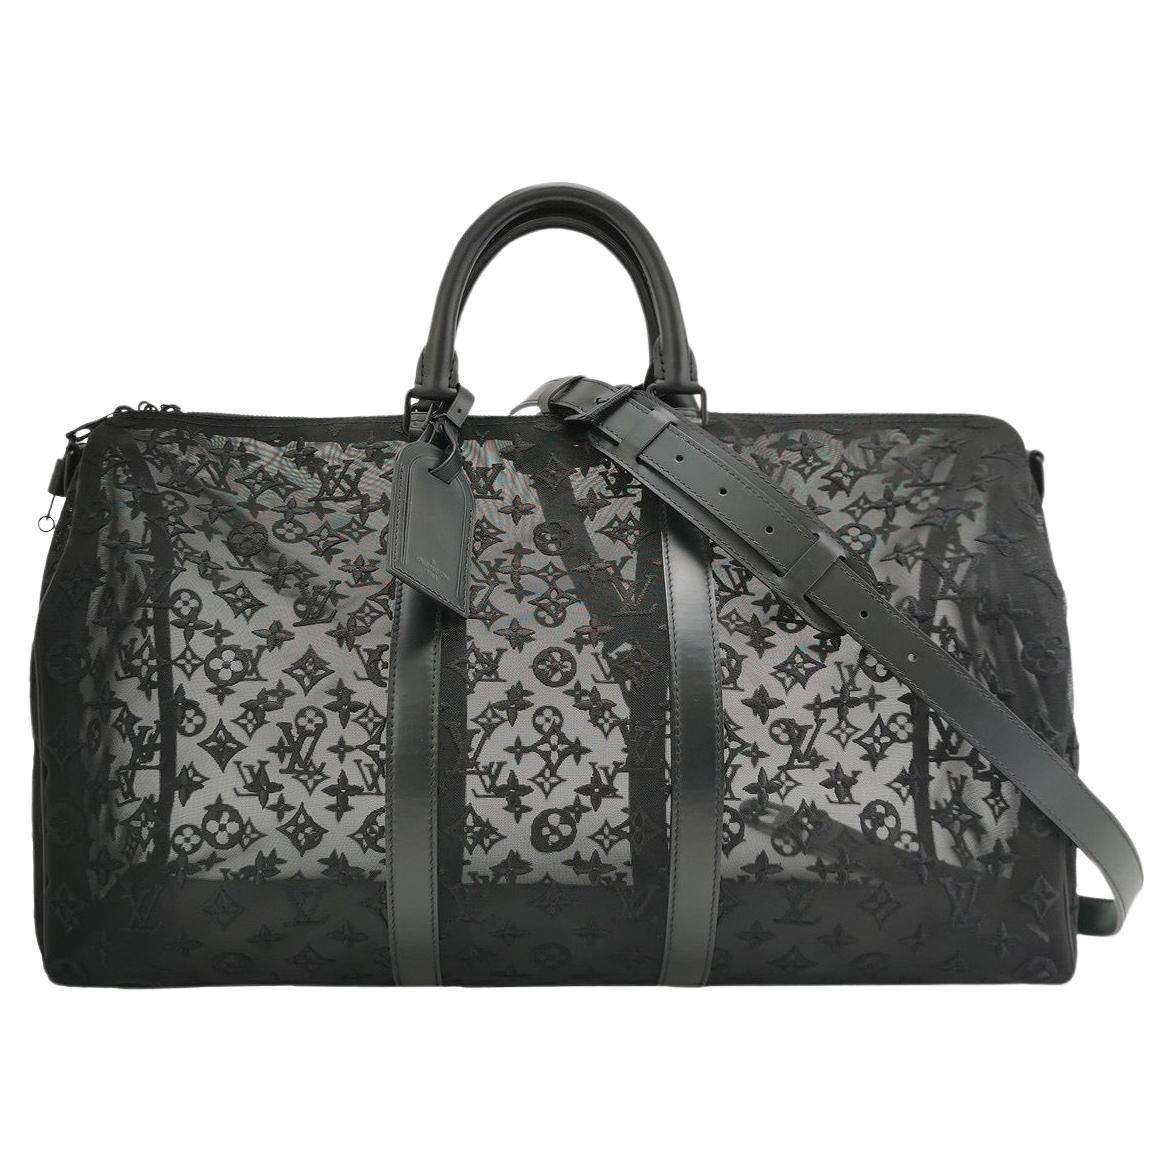 What is the most iconic Louis Vuitton bag?